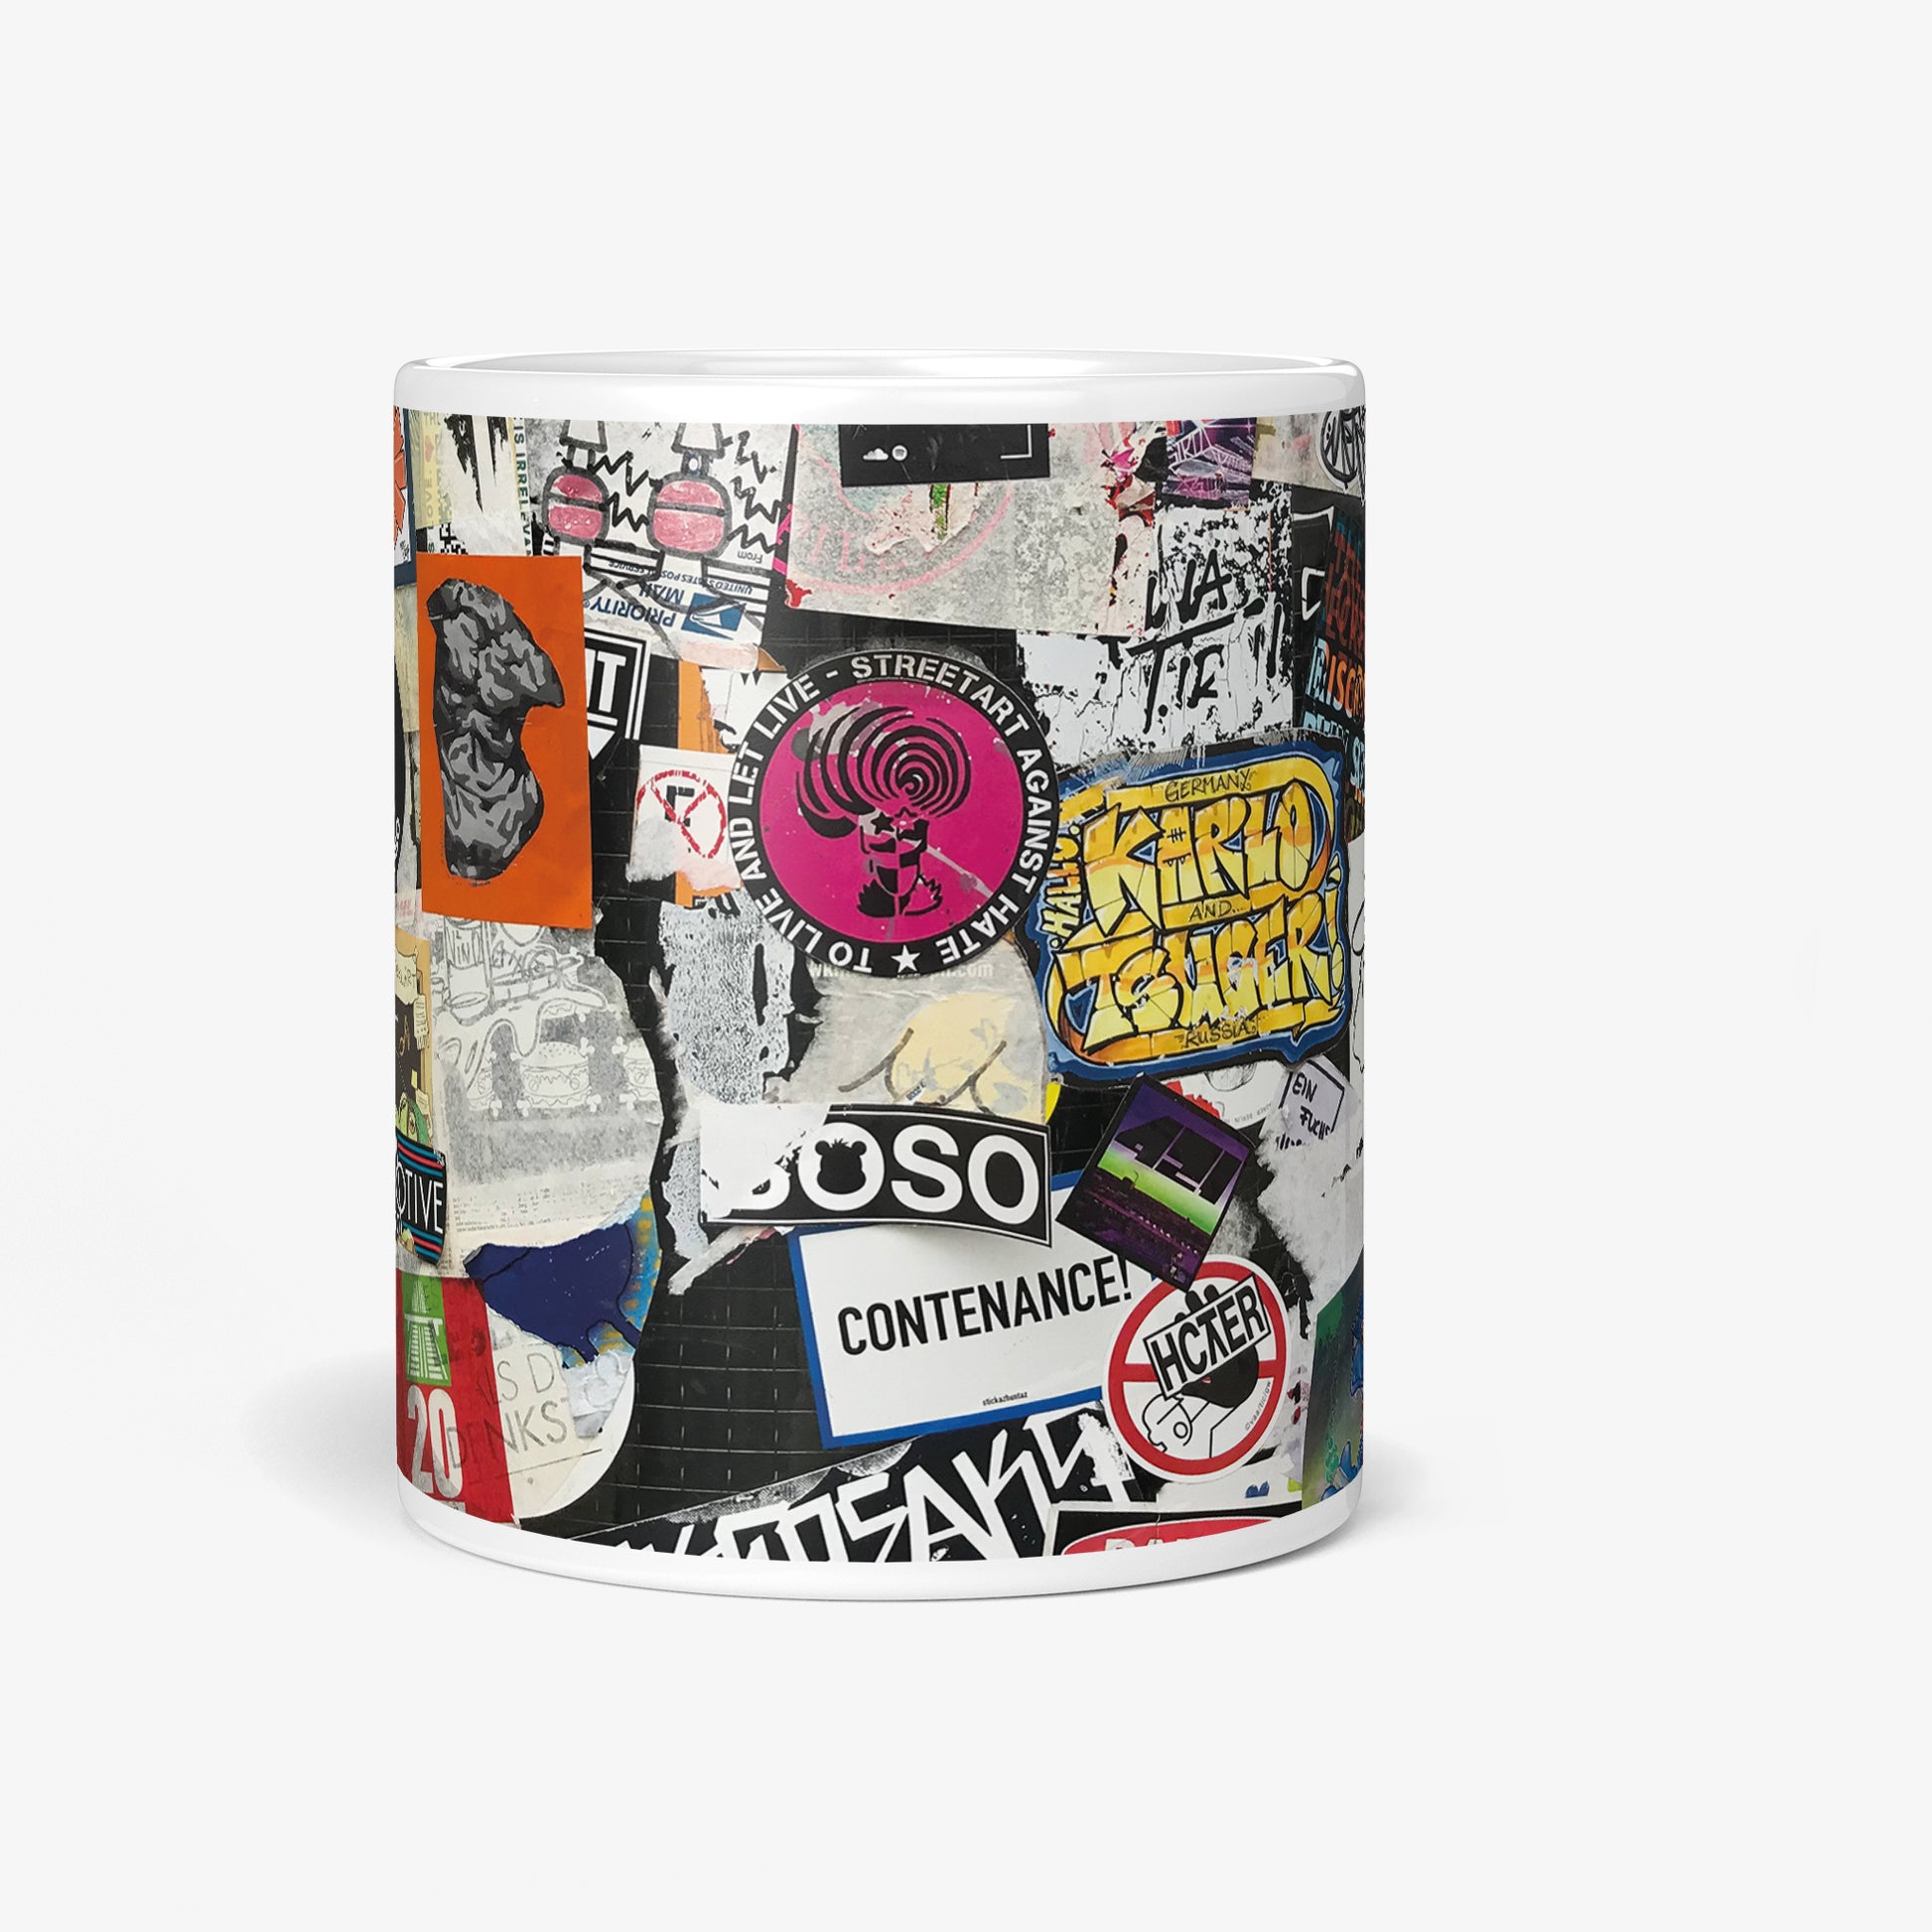 Be inspired by our Urban Art Coffee Mug – To Live And Let Live - No2 from Hamburg. Featuring a front view of the 11oz mug. The urban billboard design lends an authentic urban feel to the mug, making it resemble a piece of street art itself.